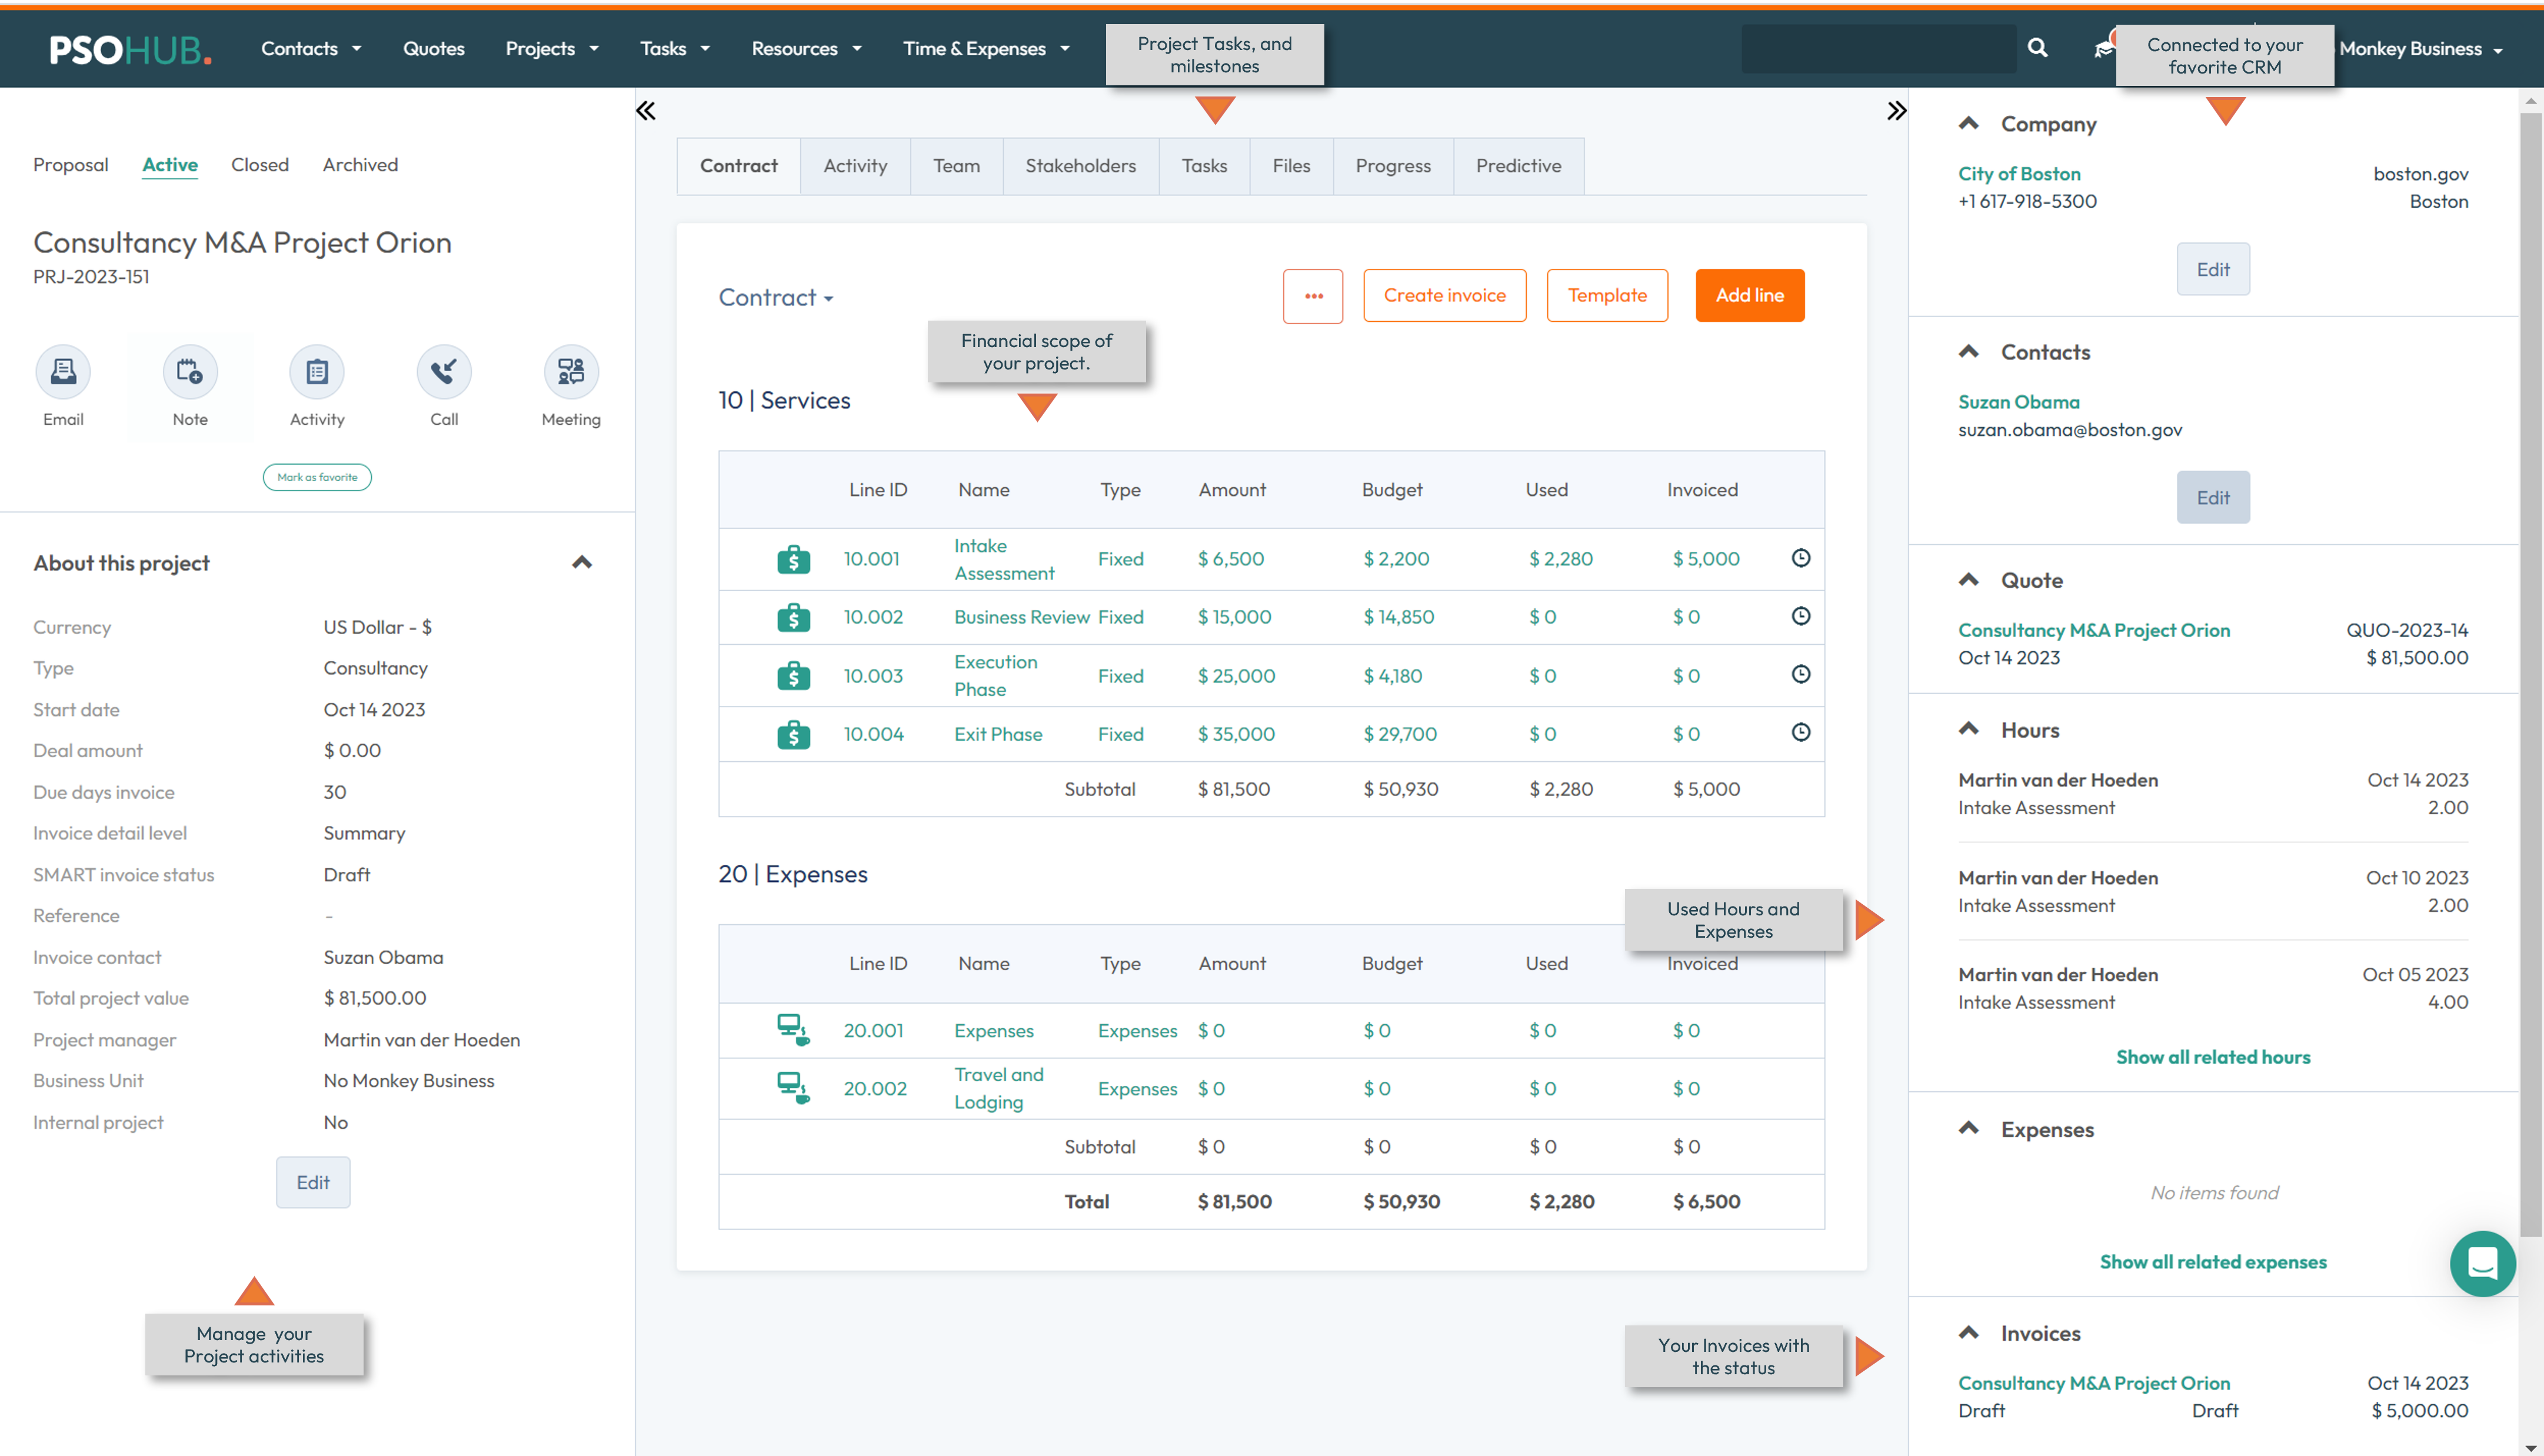 Project Tracking to manage your project activities, budget, hours & expenses and invoices.